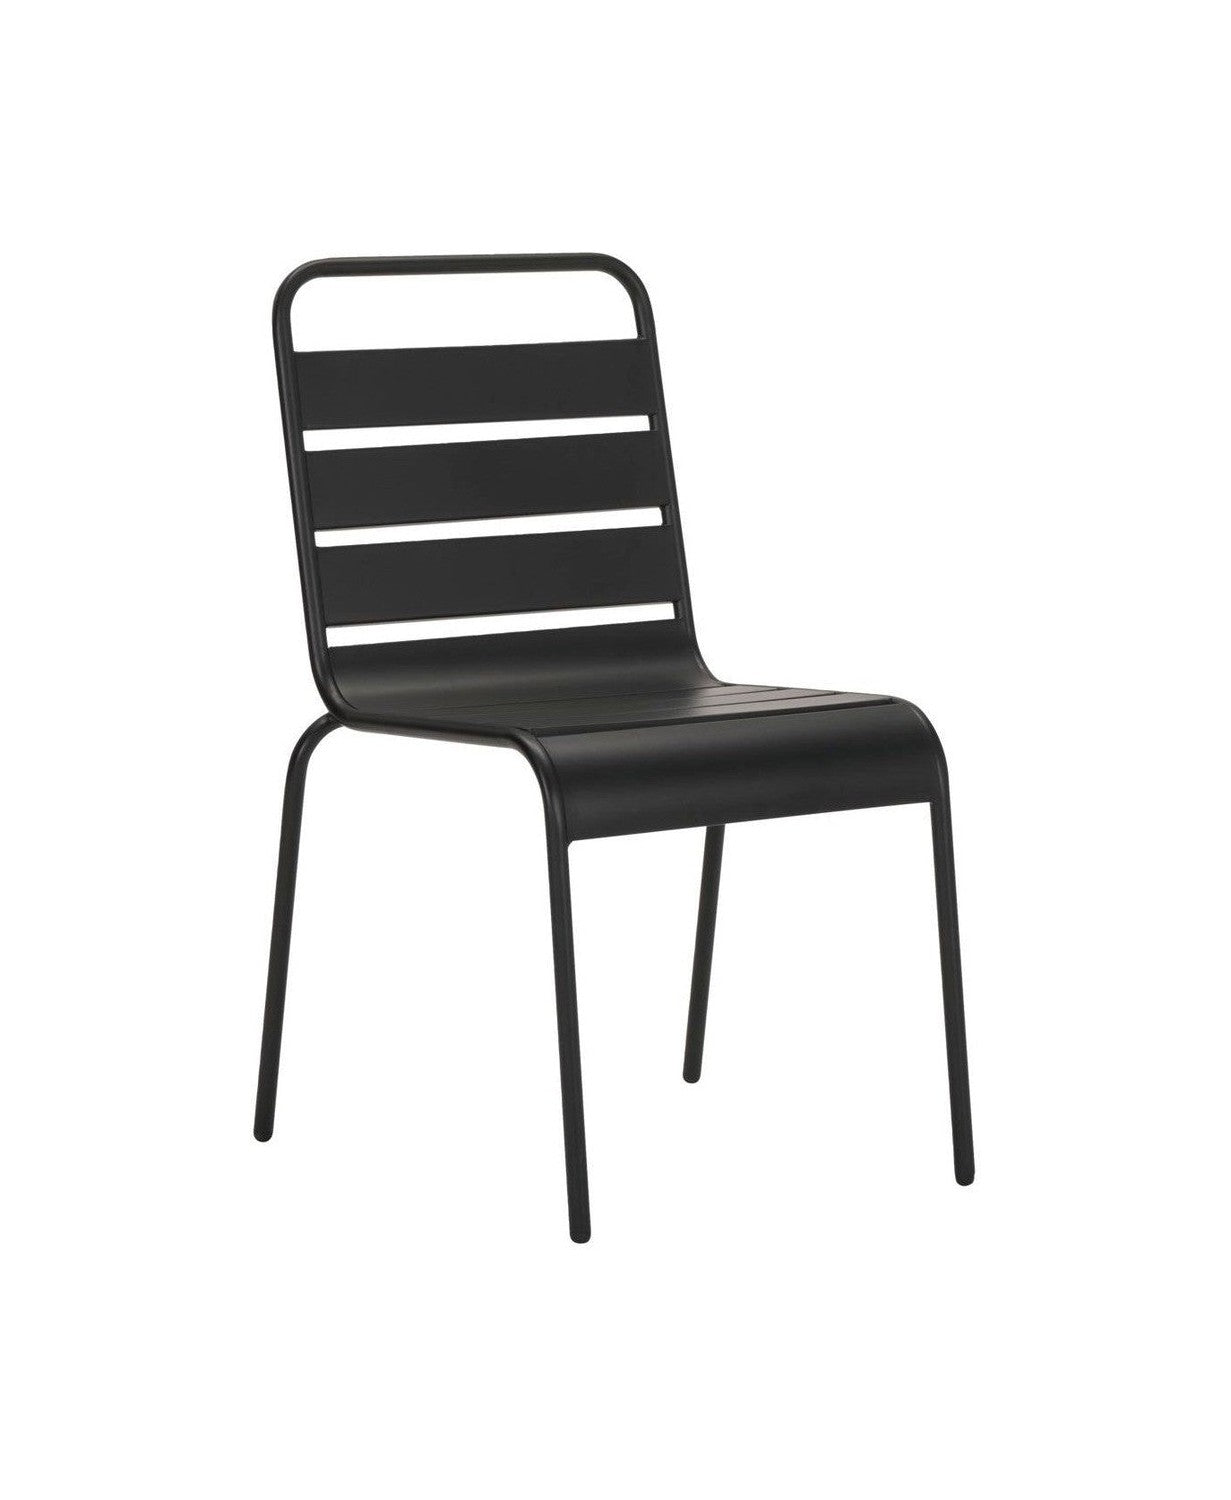 House Doctor Chair, Hdhelo, Black